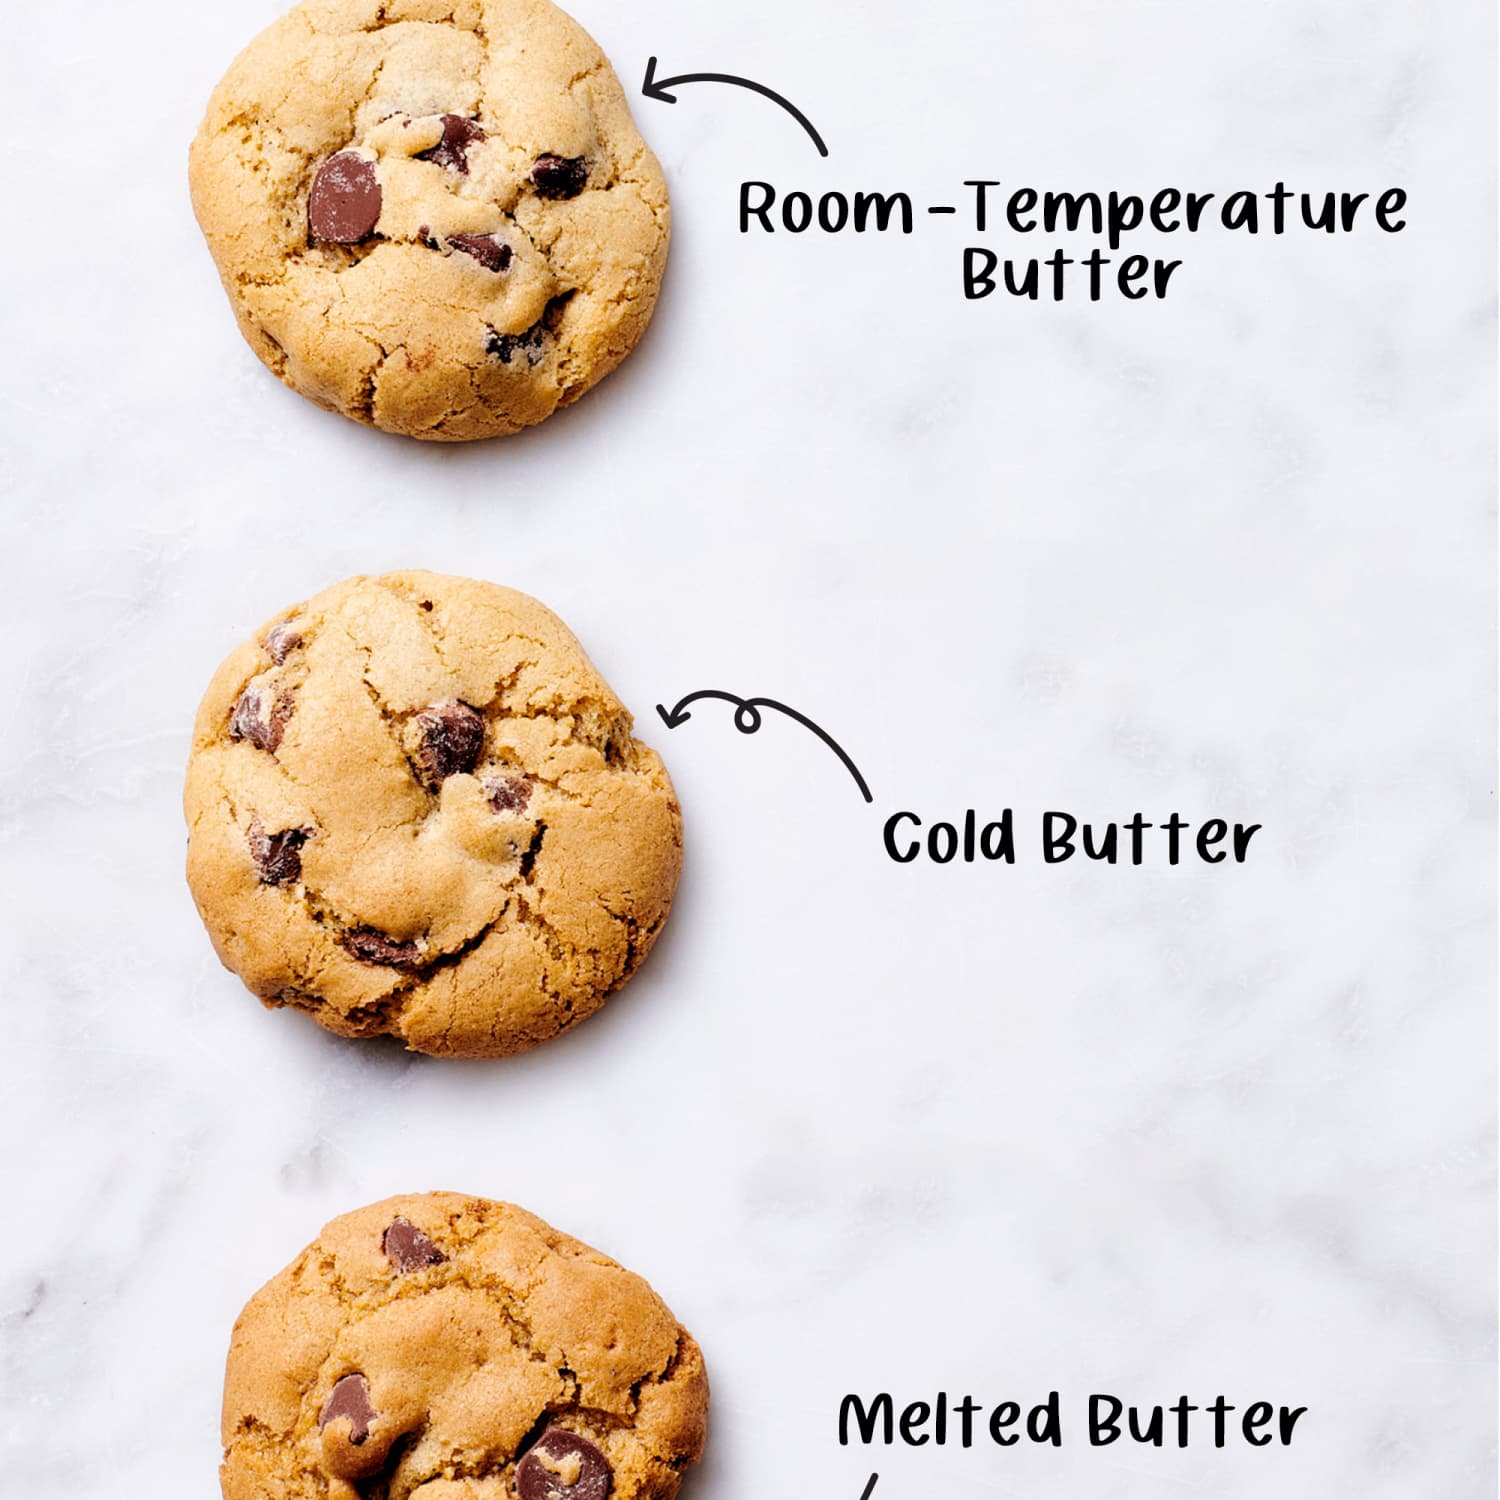 https://cdn.apartmenttherapy.info/image/upload/f_jpg,q_auto:eco,c_fill,g_auto,w_1500,ar_1:1/k%2FDesign%2F2022-11%2Fhow-butter-temperature-affects-cookies%2Fhow-butter-temperature-affects-cookies